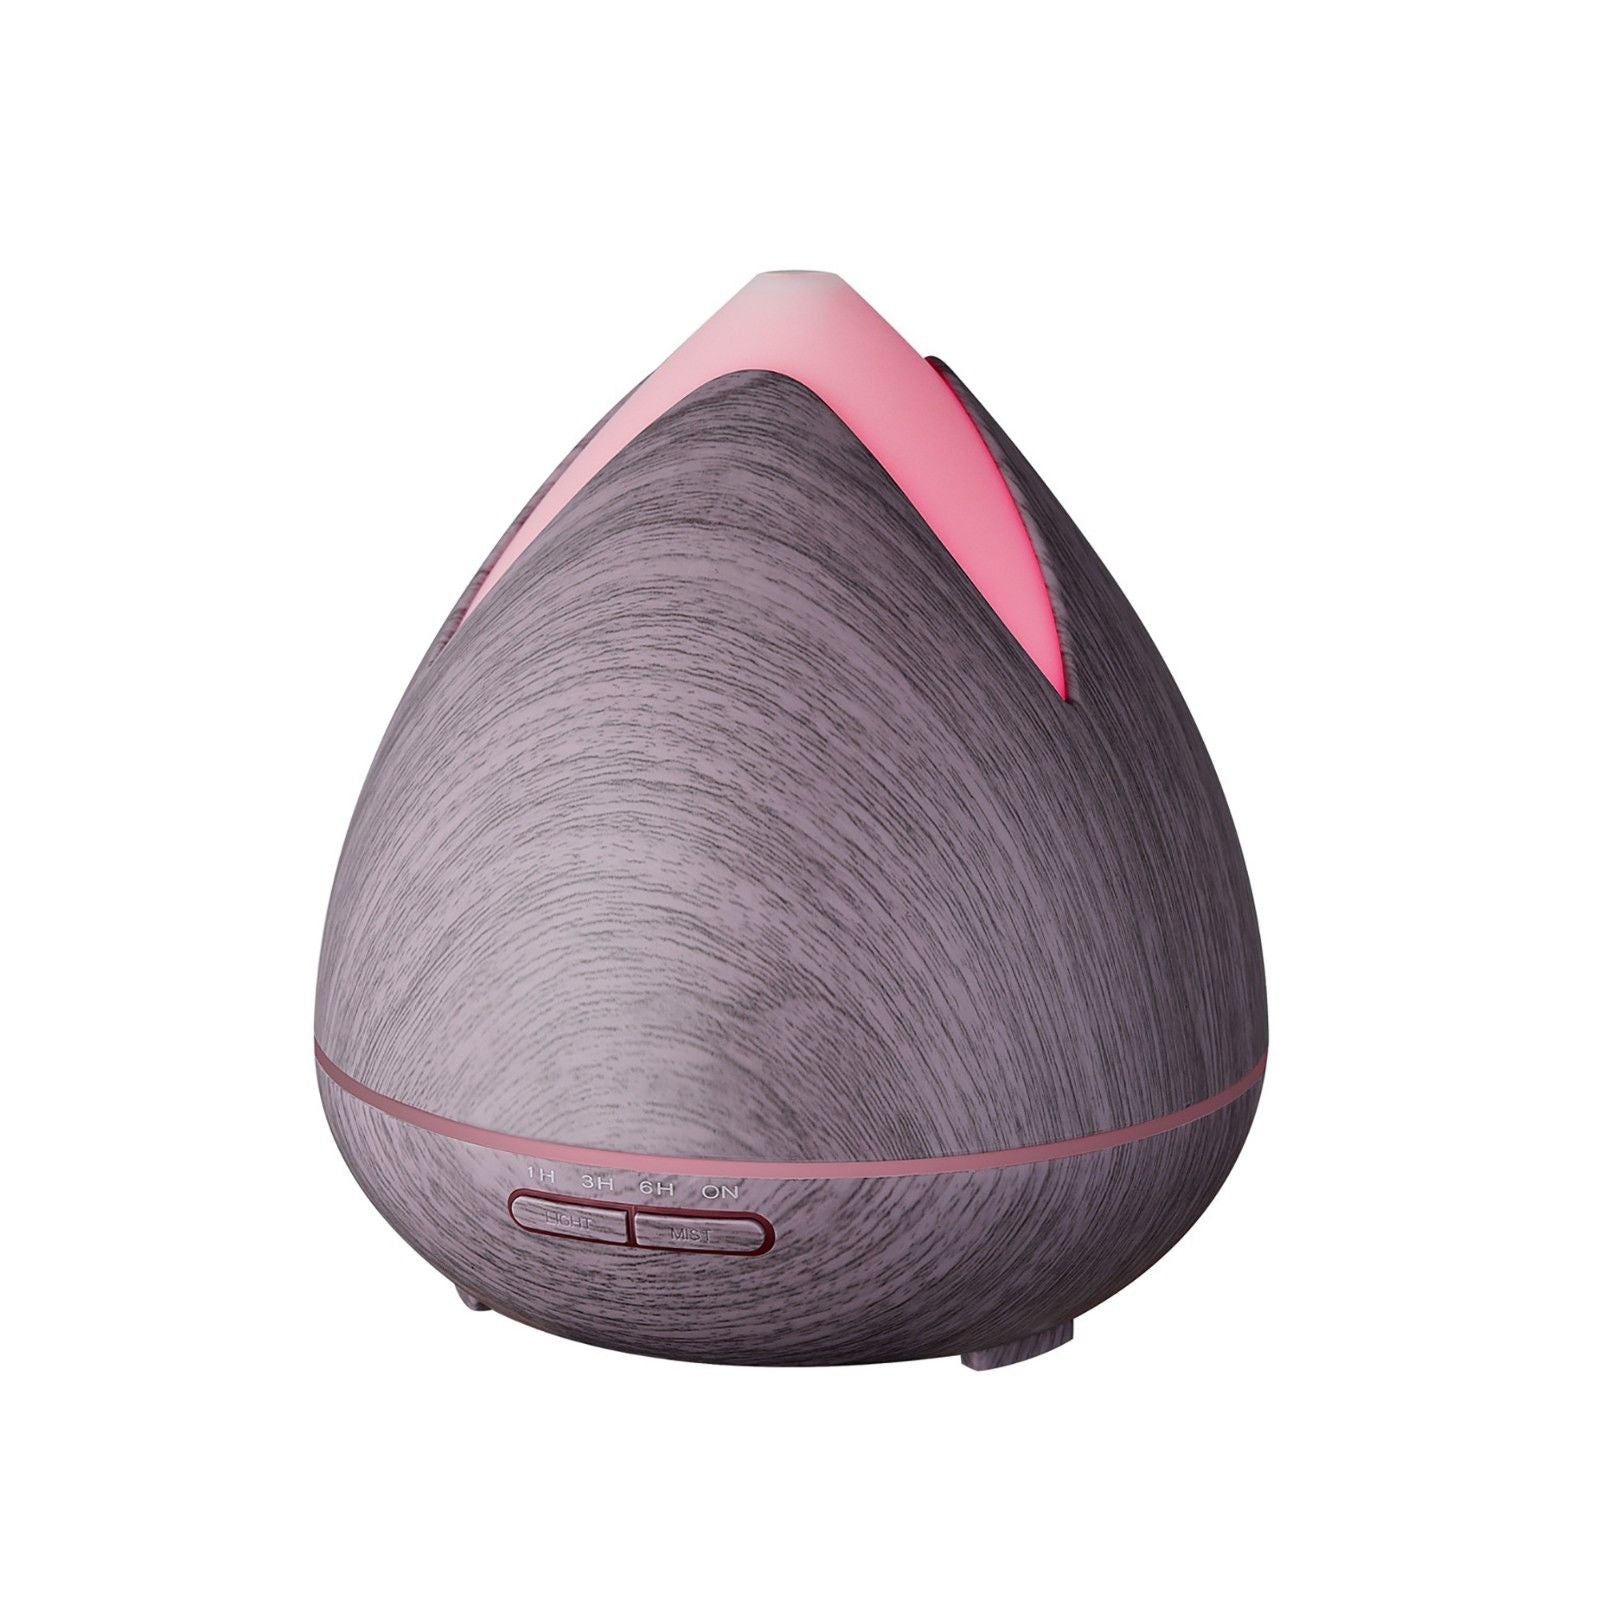 Essential Oils Ultrasonic Aromatherapy Diffuser Air Humidifier Purify 400ML - Violet - SILBERSHELL